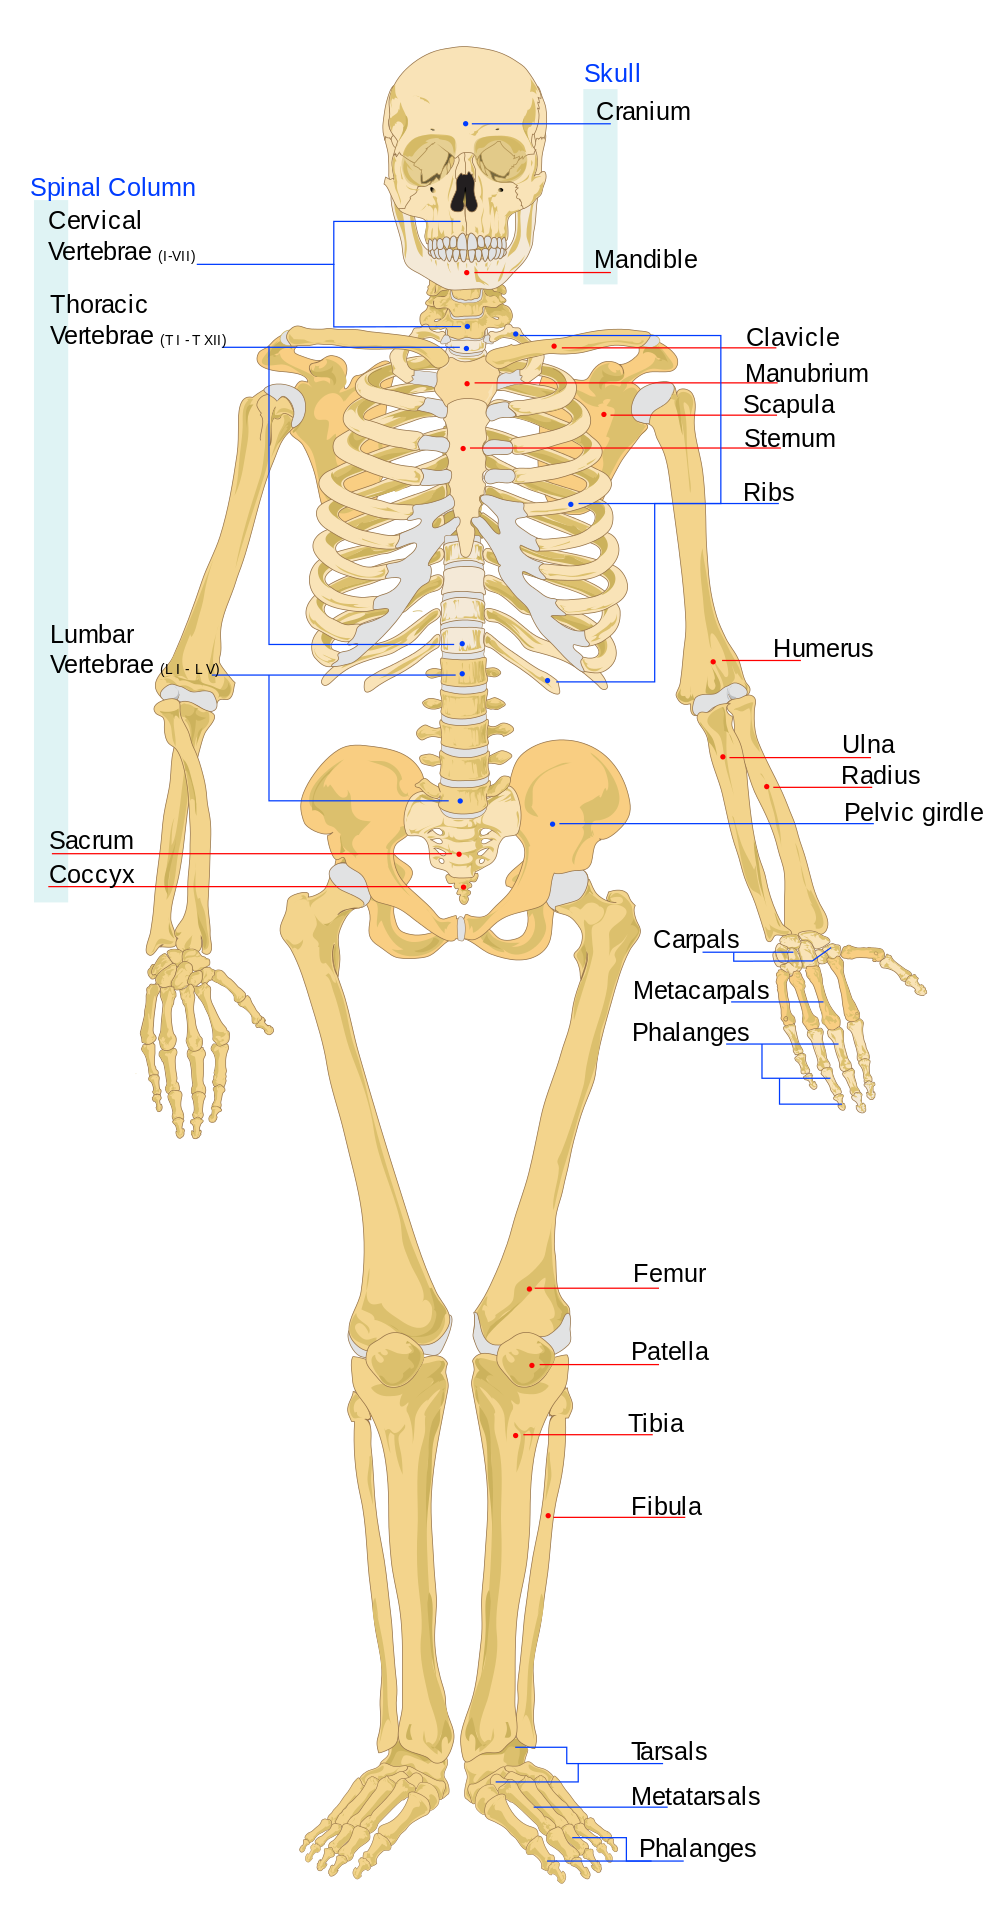 Diagram of the human skeleton. The cranium and mandible comprise the skull. The spinal column is composed of the seven cervical vertebrae, the nine thoracic vertebra, the four lumbar vertebrae, the sacrum, and the coccyx. The pelvic girdle attaches to the sacrum. The ribs connect to the spinal column. The front of the rib cage includes the clavicle, manubrium, scapula, and sternum. The arm bones include (from shoulder down) the humerus, ulna, and radius. The hand is composed of carpals, metacarpals, and phalanges. The leg bones include (from hip down) the femur, the patella (the knee), the tibia, and the fibula. The foot is composed of tarsals, metatarsals, and phalanges.